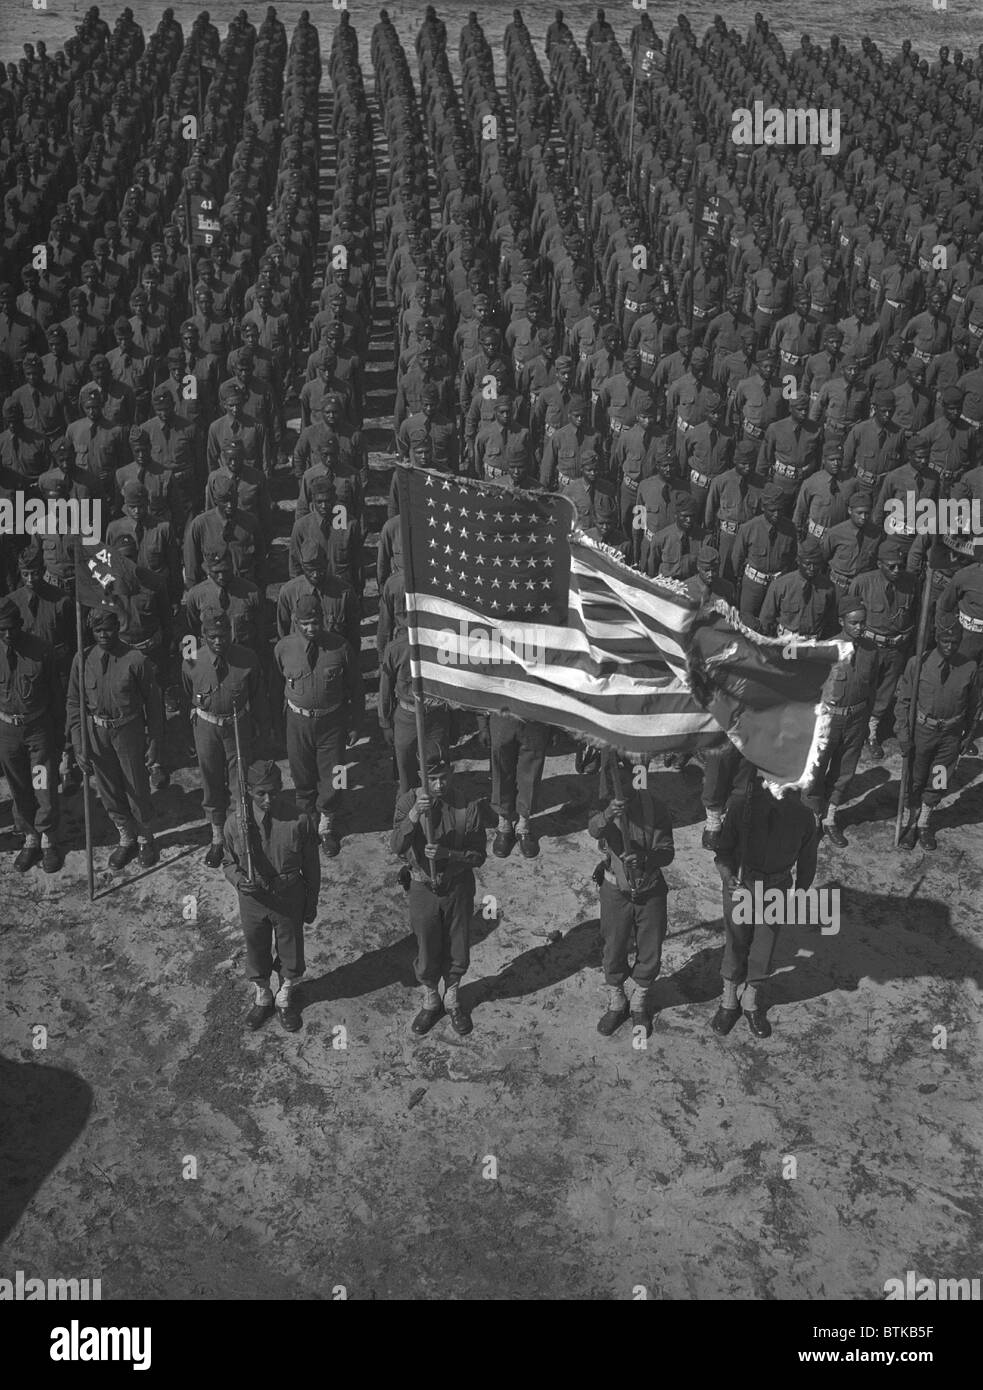 U.S. Army 41st Engineers on parade ground at Fort Bragg, North Carolina, March 1942. In the segregated army, many African Americans was assigned to engineer construction that built and repaired roads, airfields, and bridges. Stock Photo